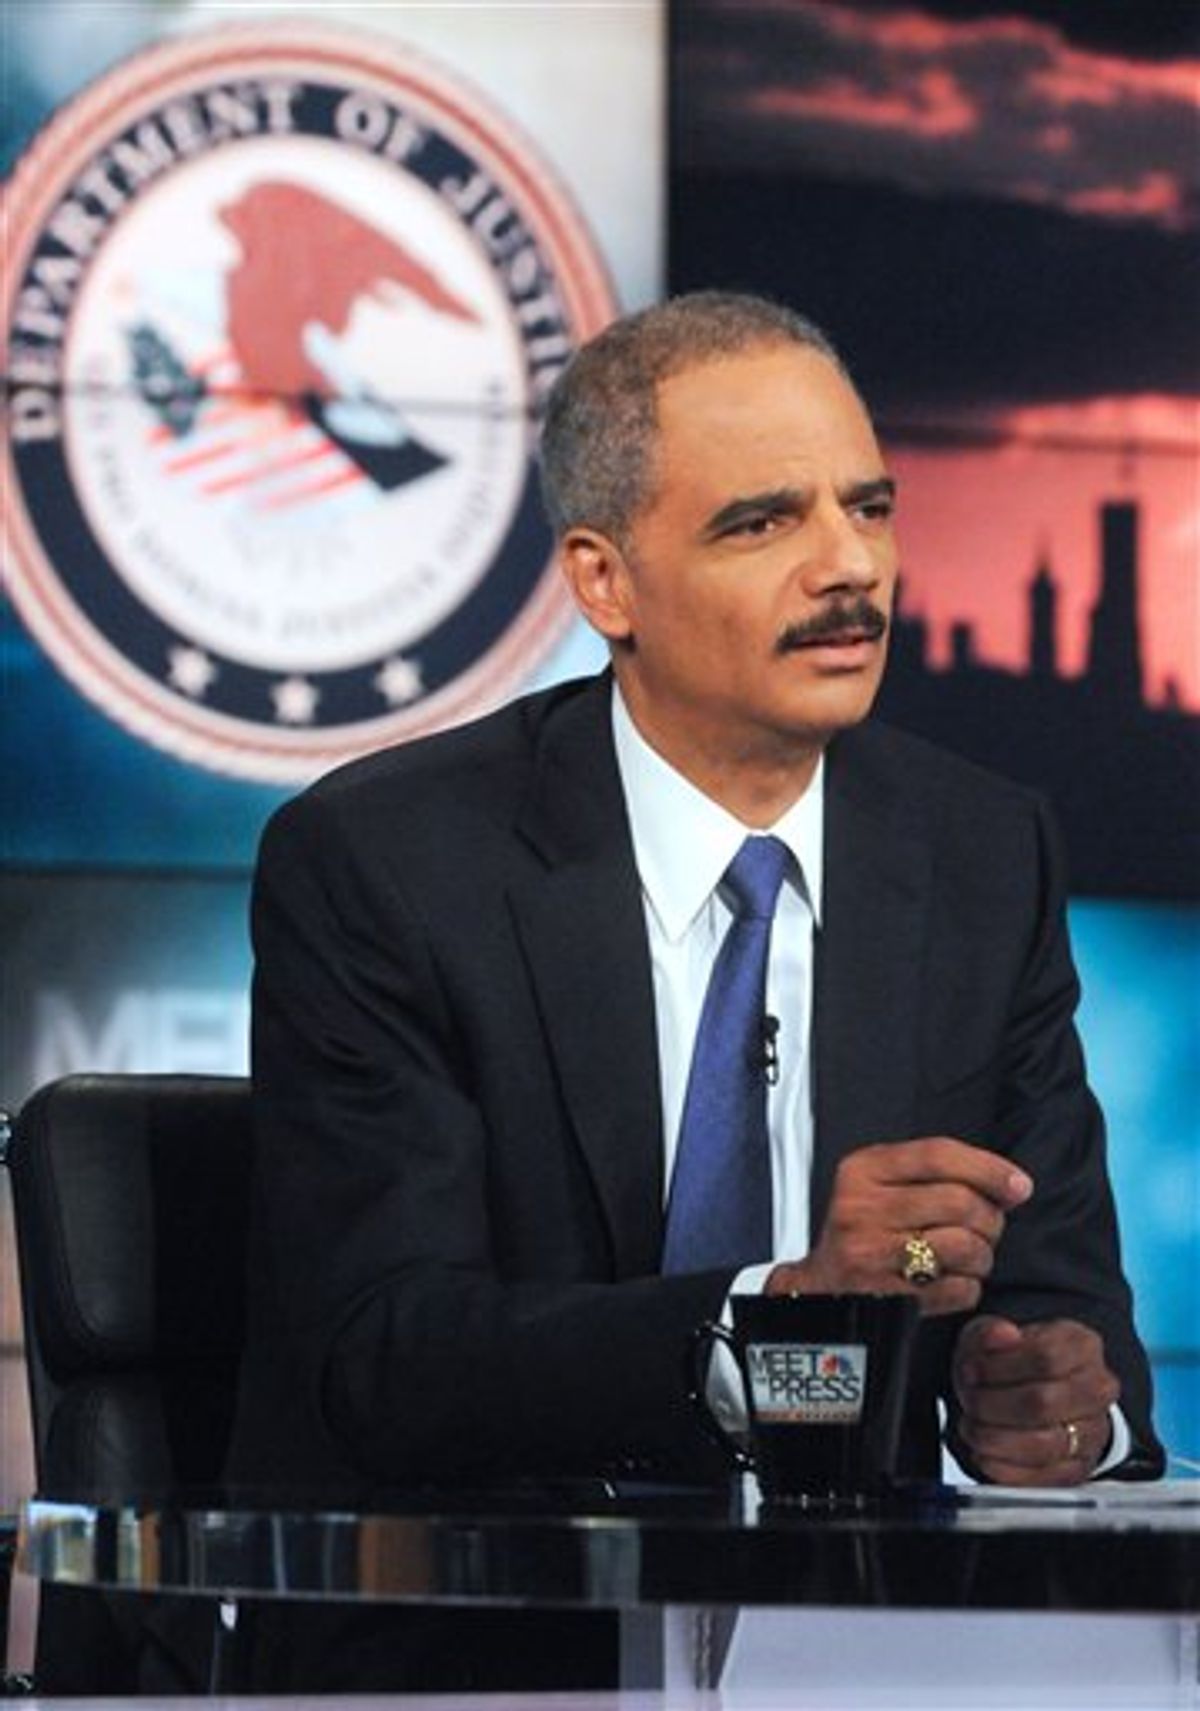 This photo provided by NBC shows U.S. Attorney General Eric Holder speaking on "Meet the Press" in Washington Sunday, May 9, 2010. Holder said Sunday that new evidence shows the Pakistani Taliban was "intimately involved" in the bombing plot on Times Square. (AP Photo/NBC, William B. Plowman) ** MANDATORY CREDIT, NO SALES. ** (AP)